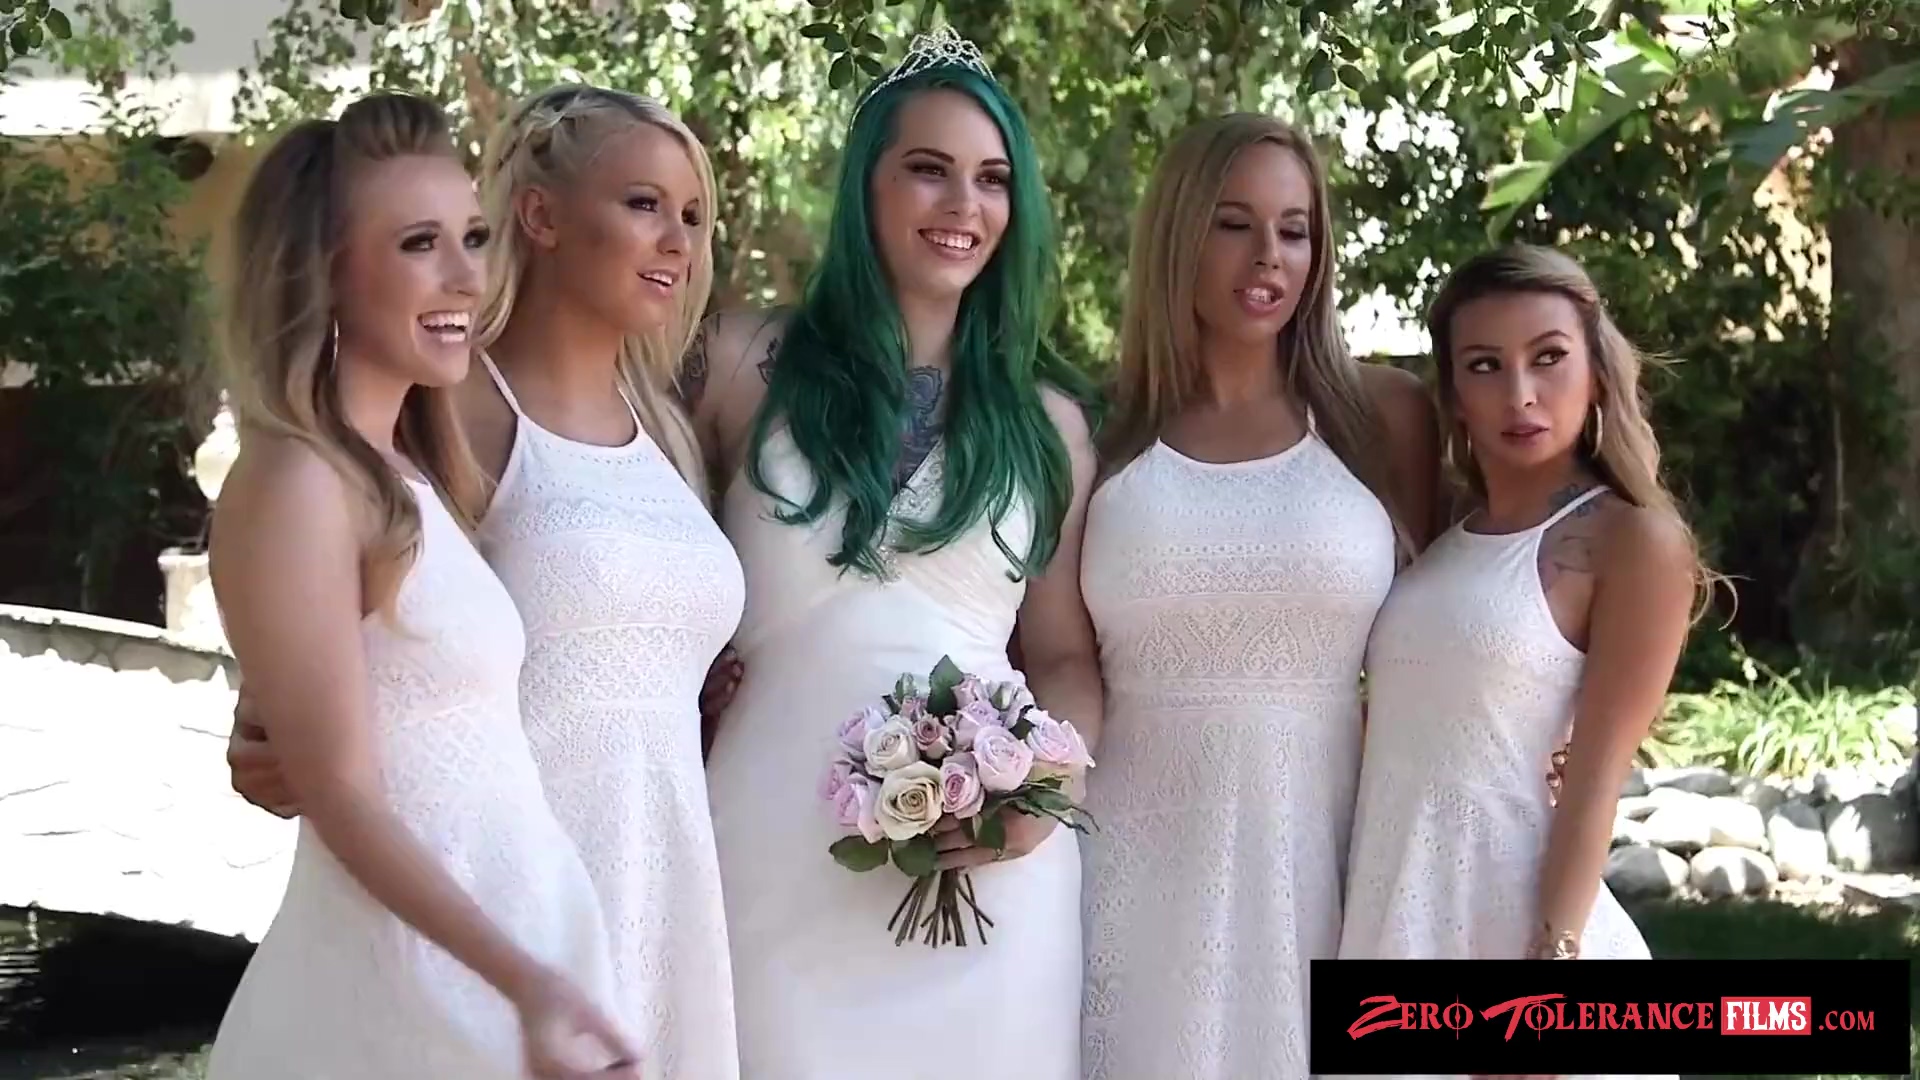 Real wedding orgy of perverted bride, groom and their friends pic